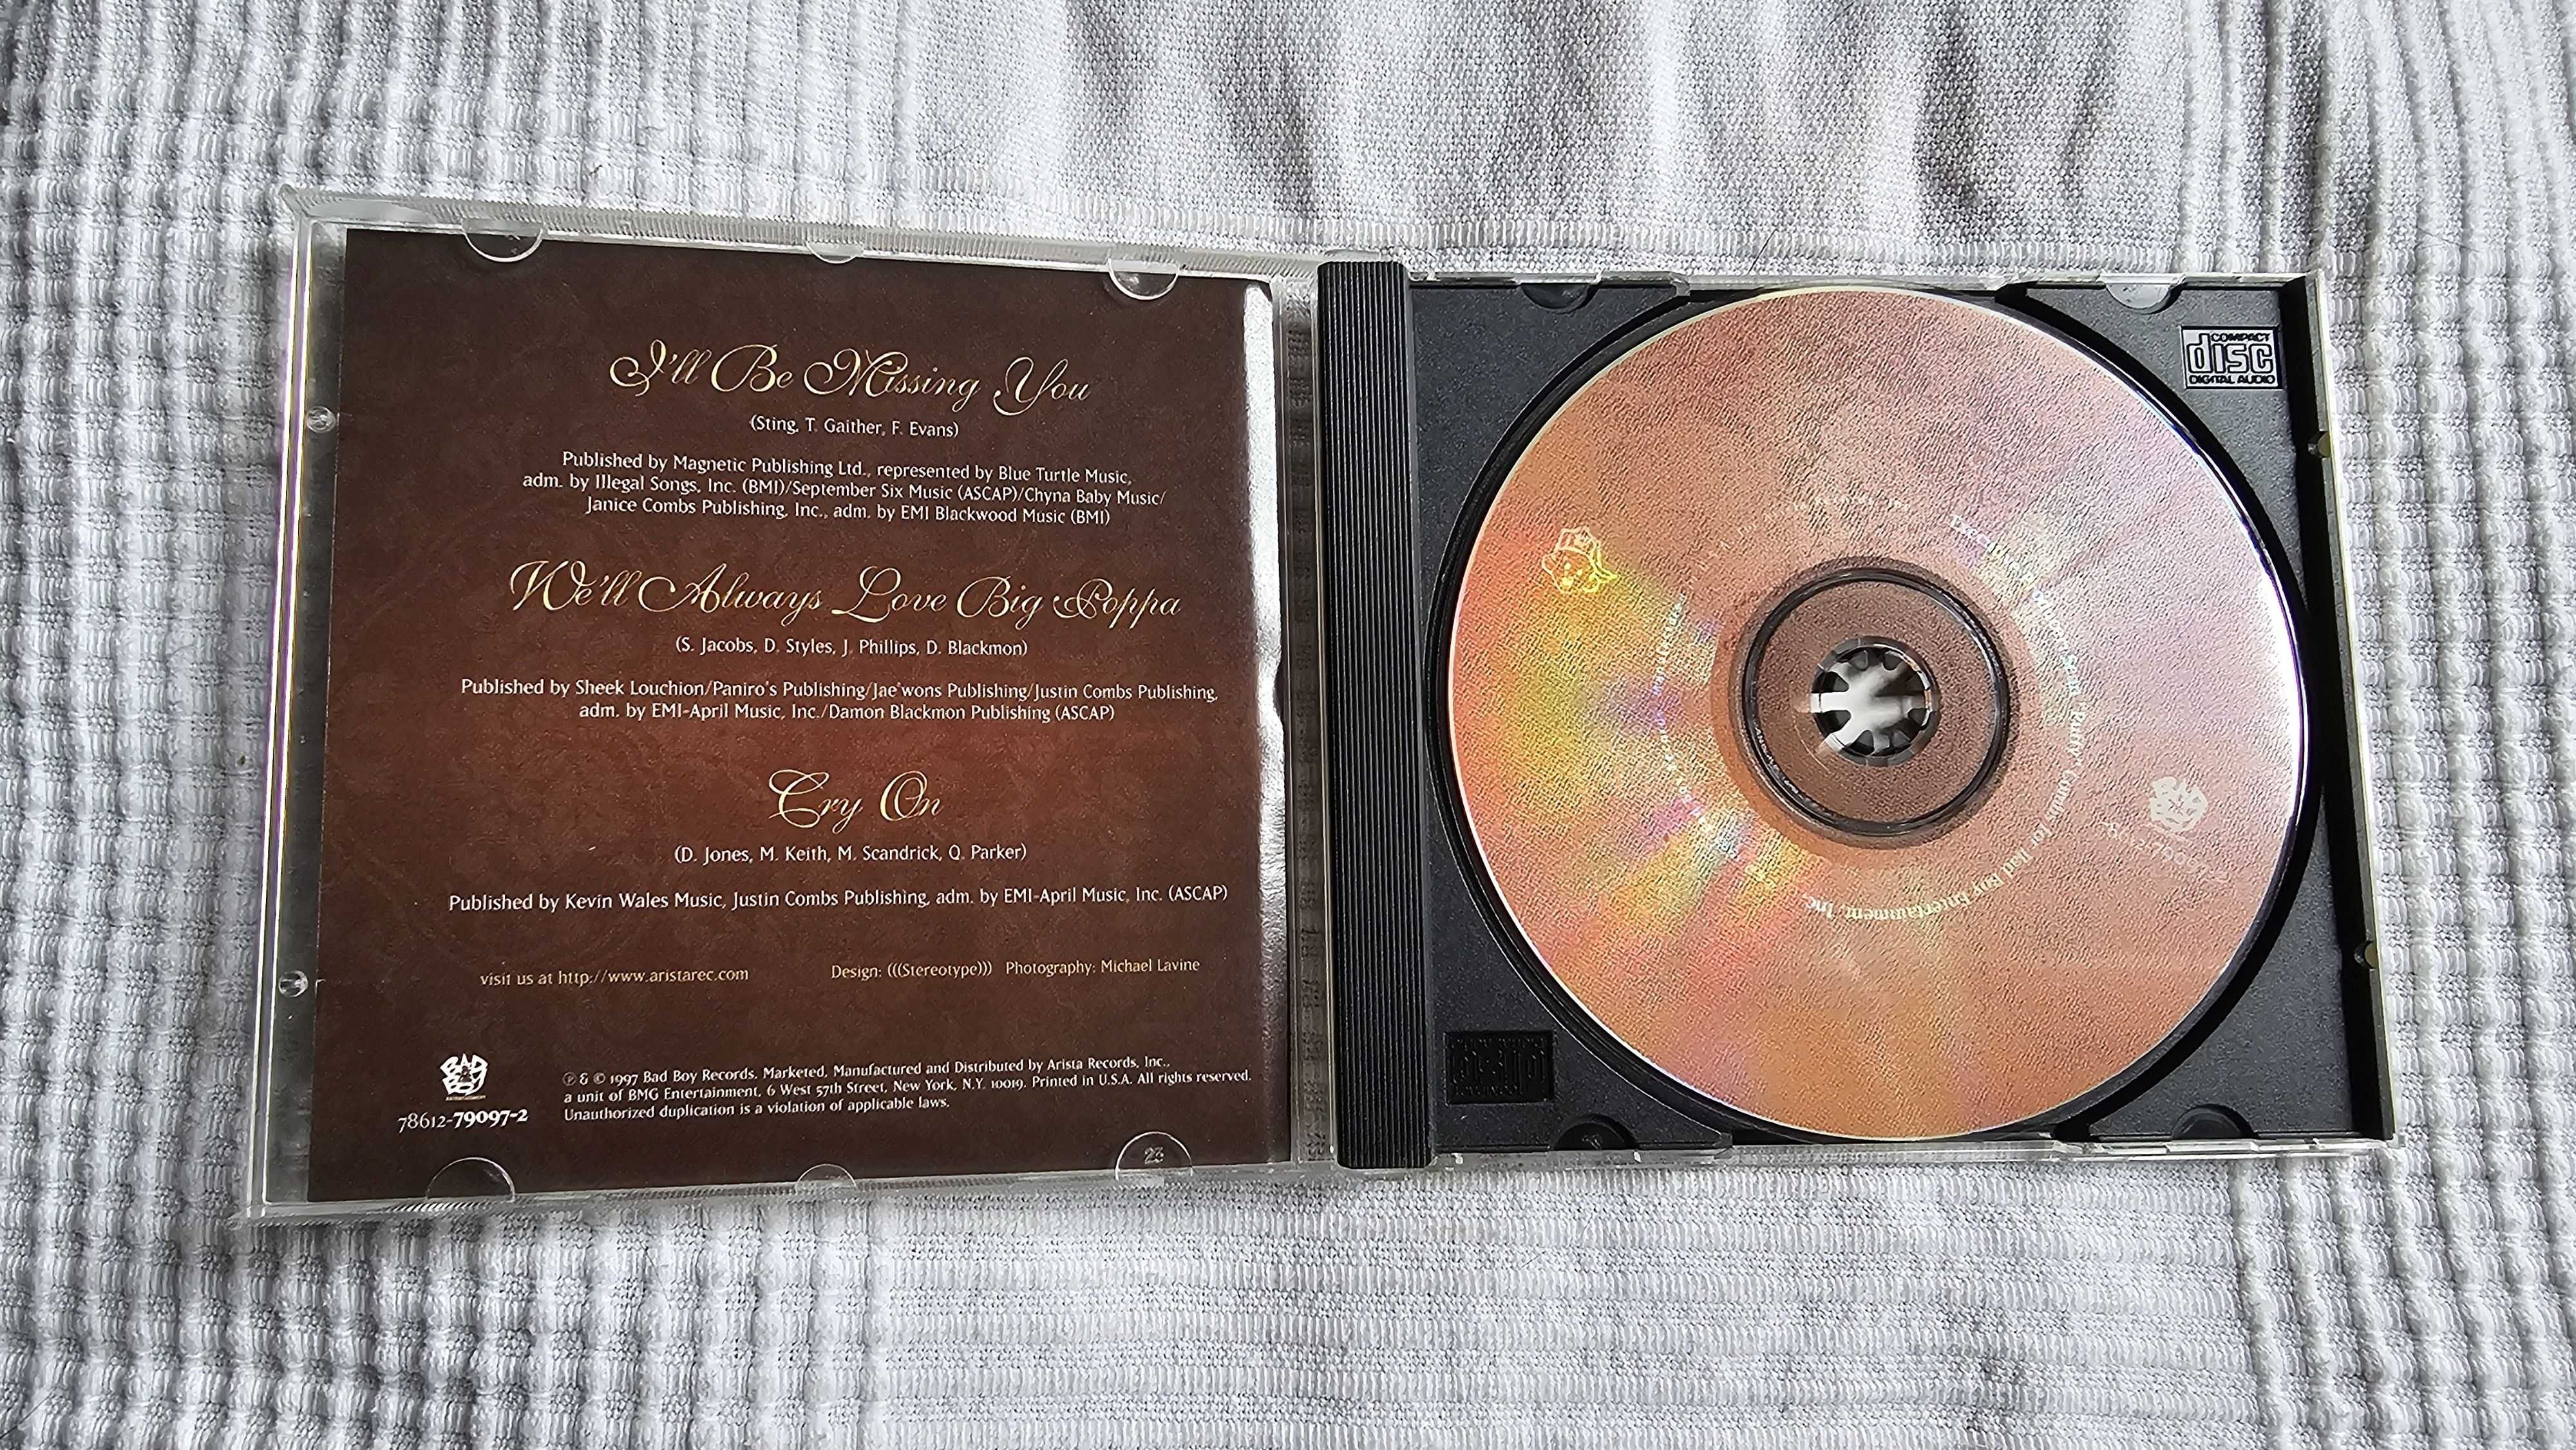 CD Tribute to the Notorious B.I.G. Puff Daddy The Lox 112